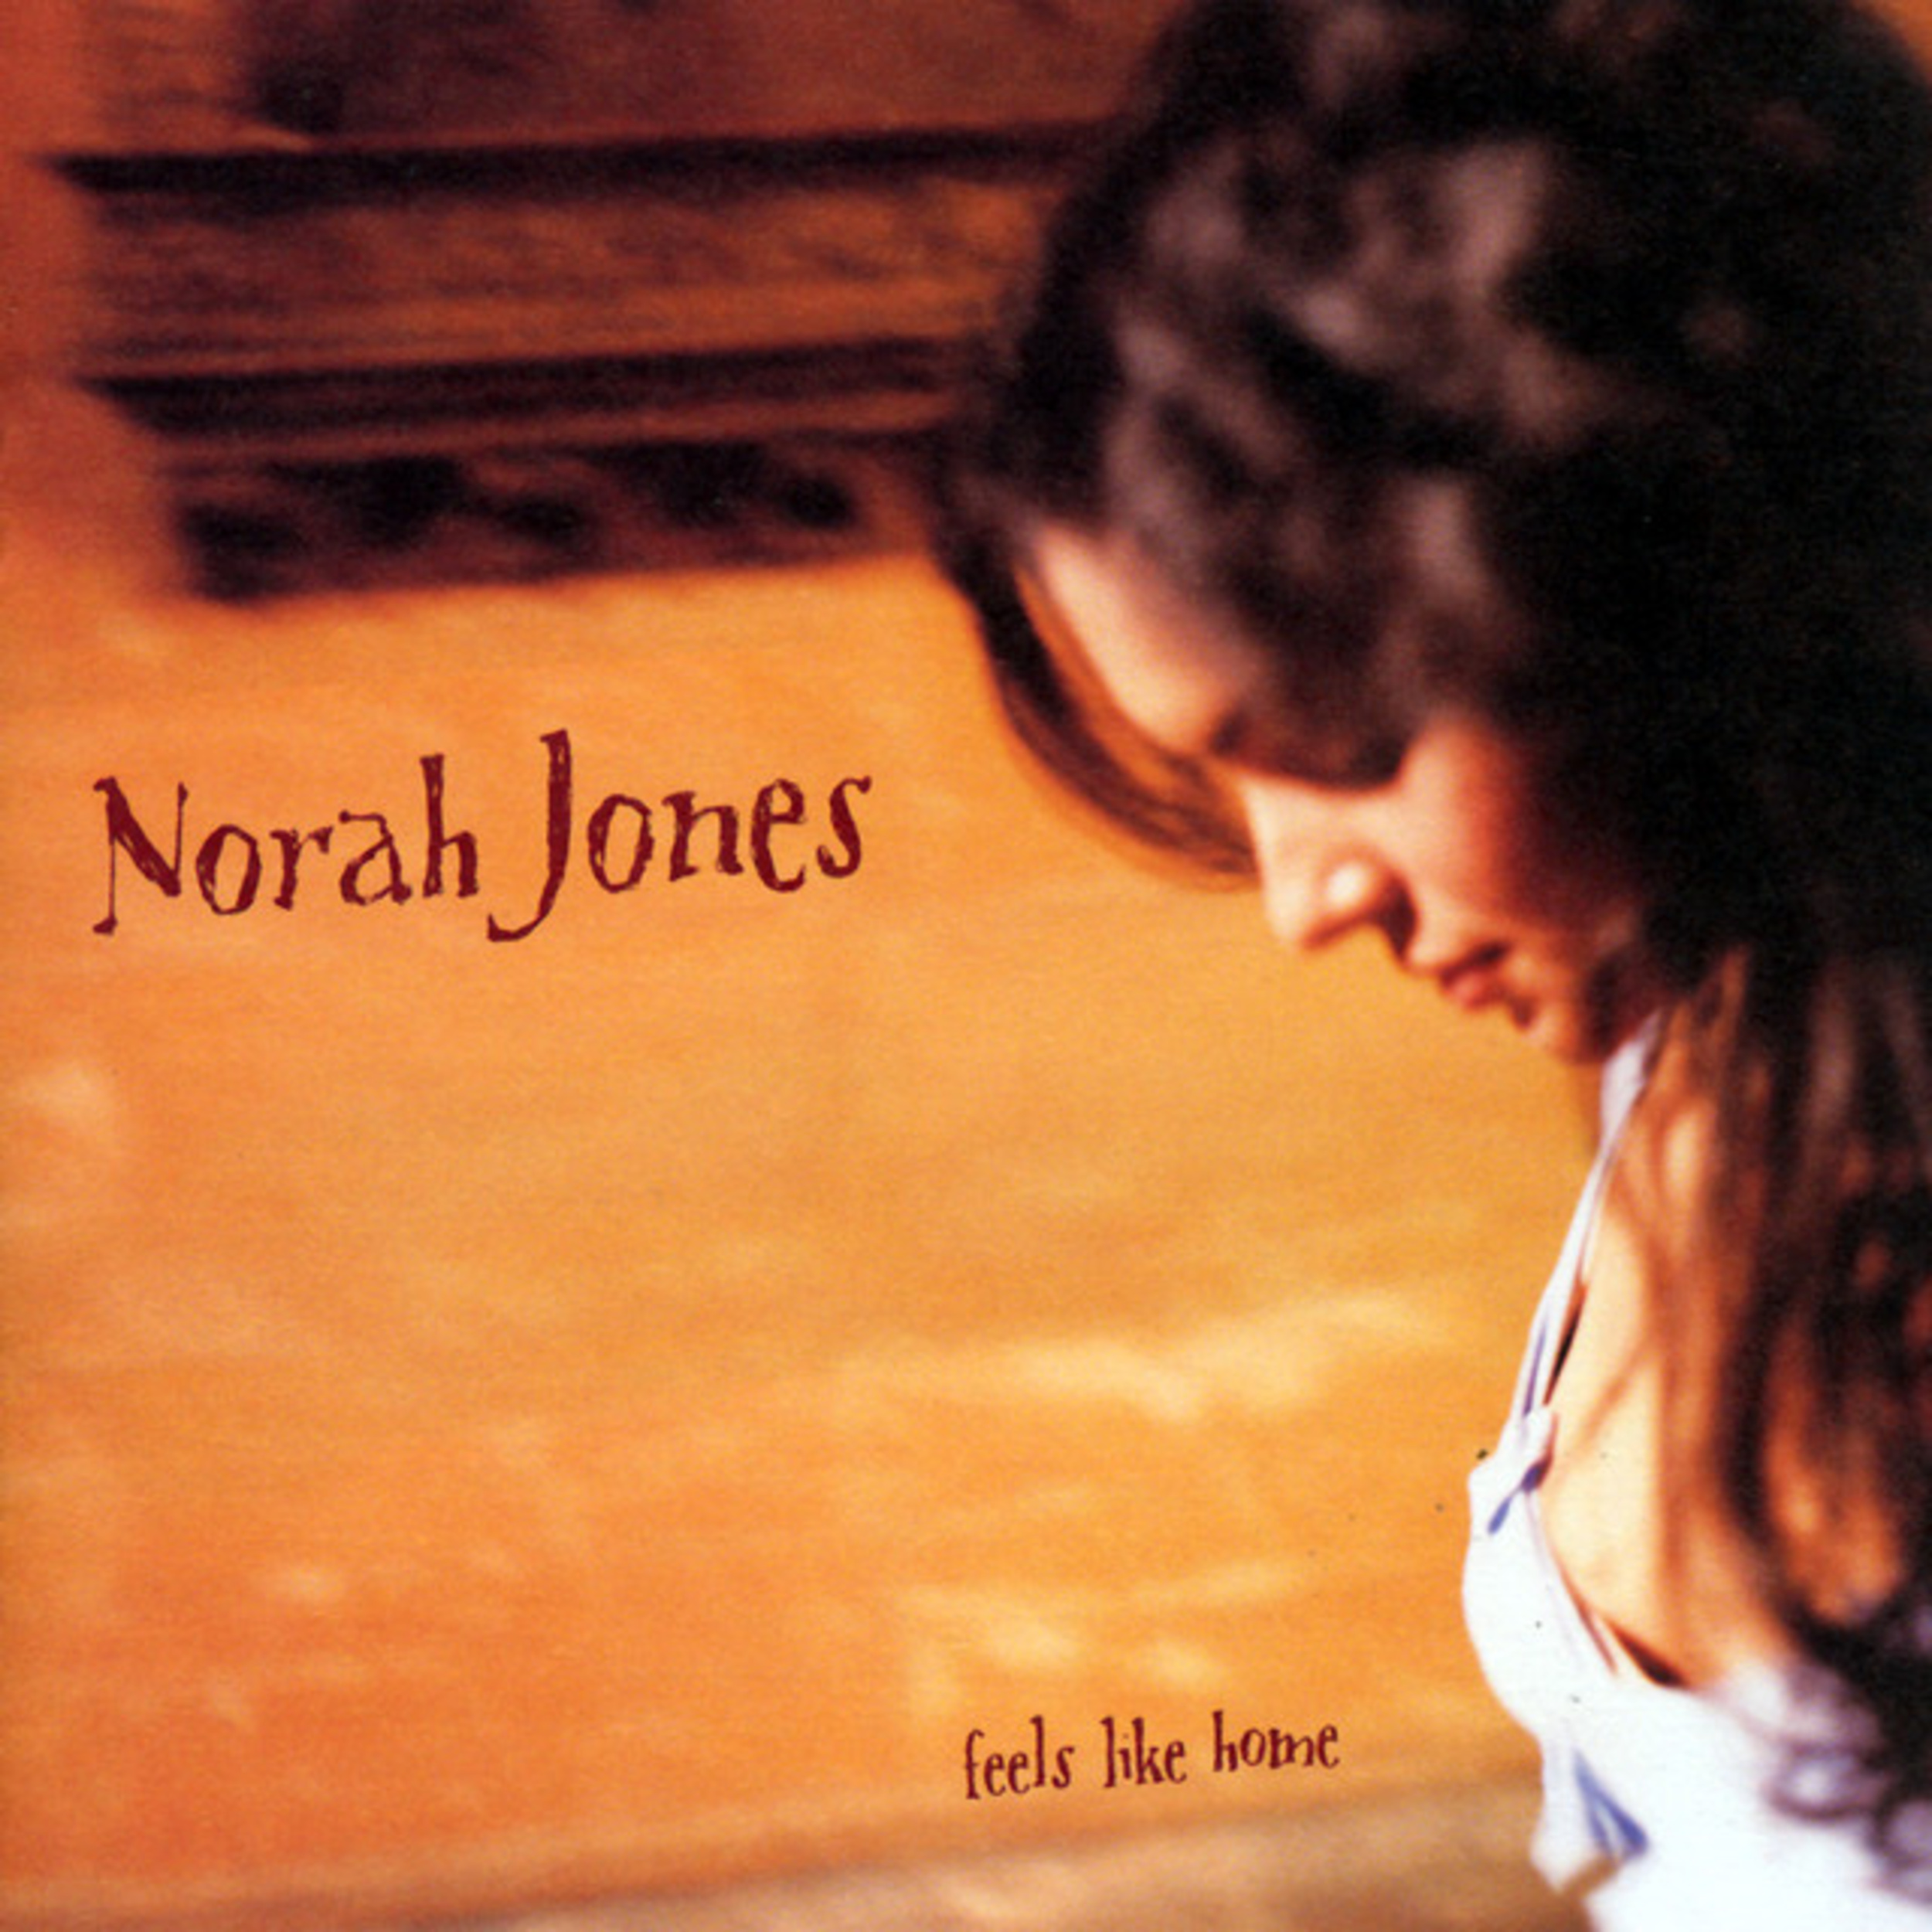 <p>Just two years after releasing her successful debut album, <em>Come Away With Me,</em> Norah Jones returned with her sophomore project, <em>Feels Like Home.</em> With her hit lead single like<a href="https://www.youtube.com/watch?v=fd02pGJx0s0"> "Sunrise," </a>Jones continued her winning streak of selling over one million copies of the album in its first week of release. </p><p><a href='https://www.msn.com/en-us/community/channel/vid-cj9pqbr0vn9in2b6ddcd8sfgpfq6x6utp44fssrv6mc2gtybw0us'>Follow us on MSN to see more of our exclusive entertainment content.</a></p>